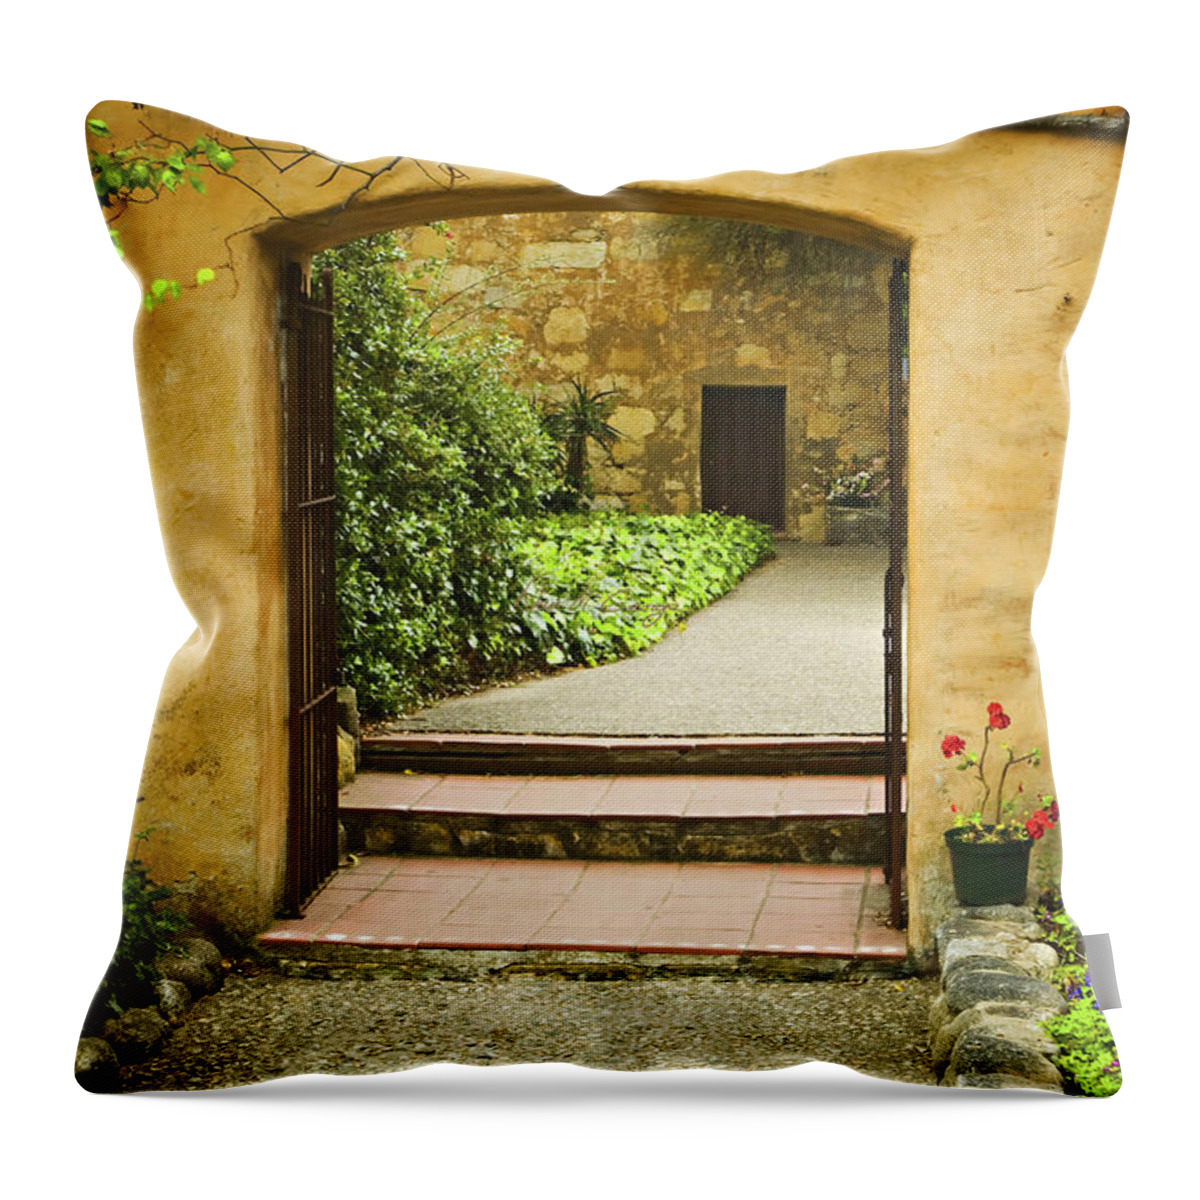 Mission Throw Pillow featuring the photograph Inner Courtyard by Dan McGeorge